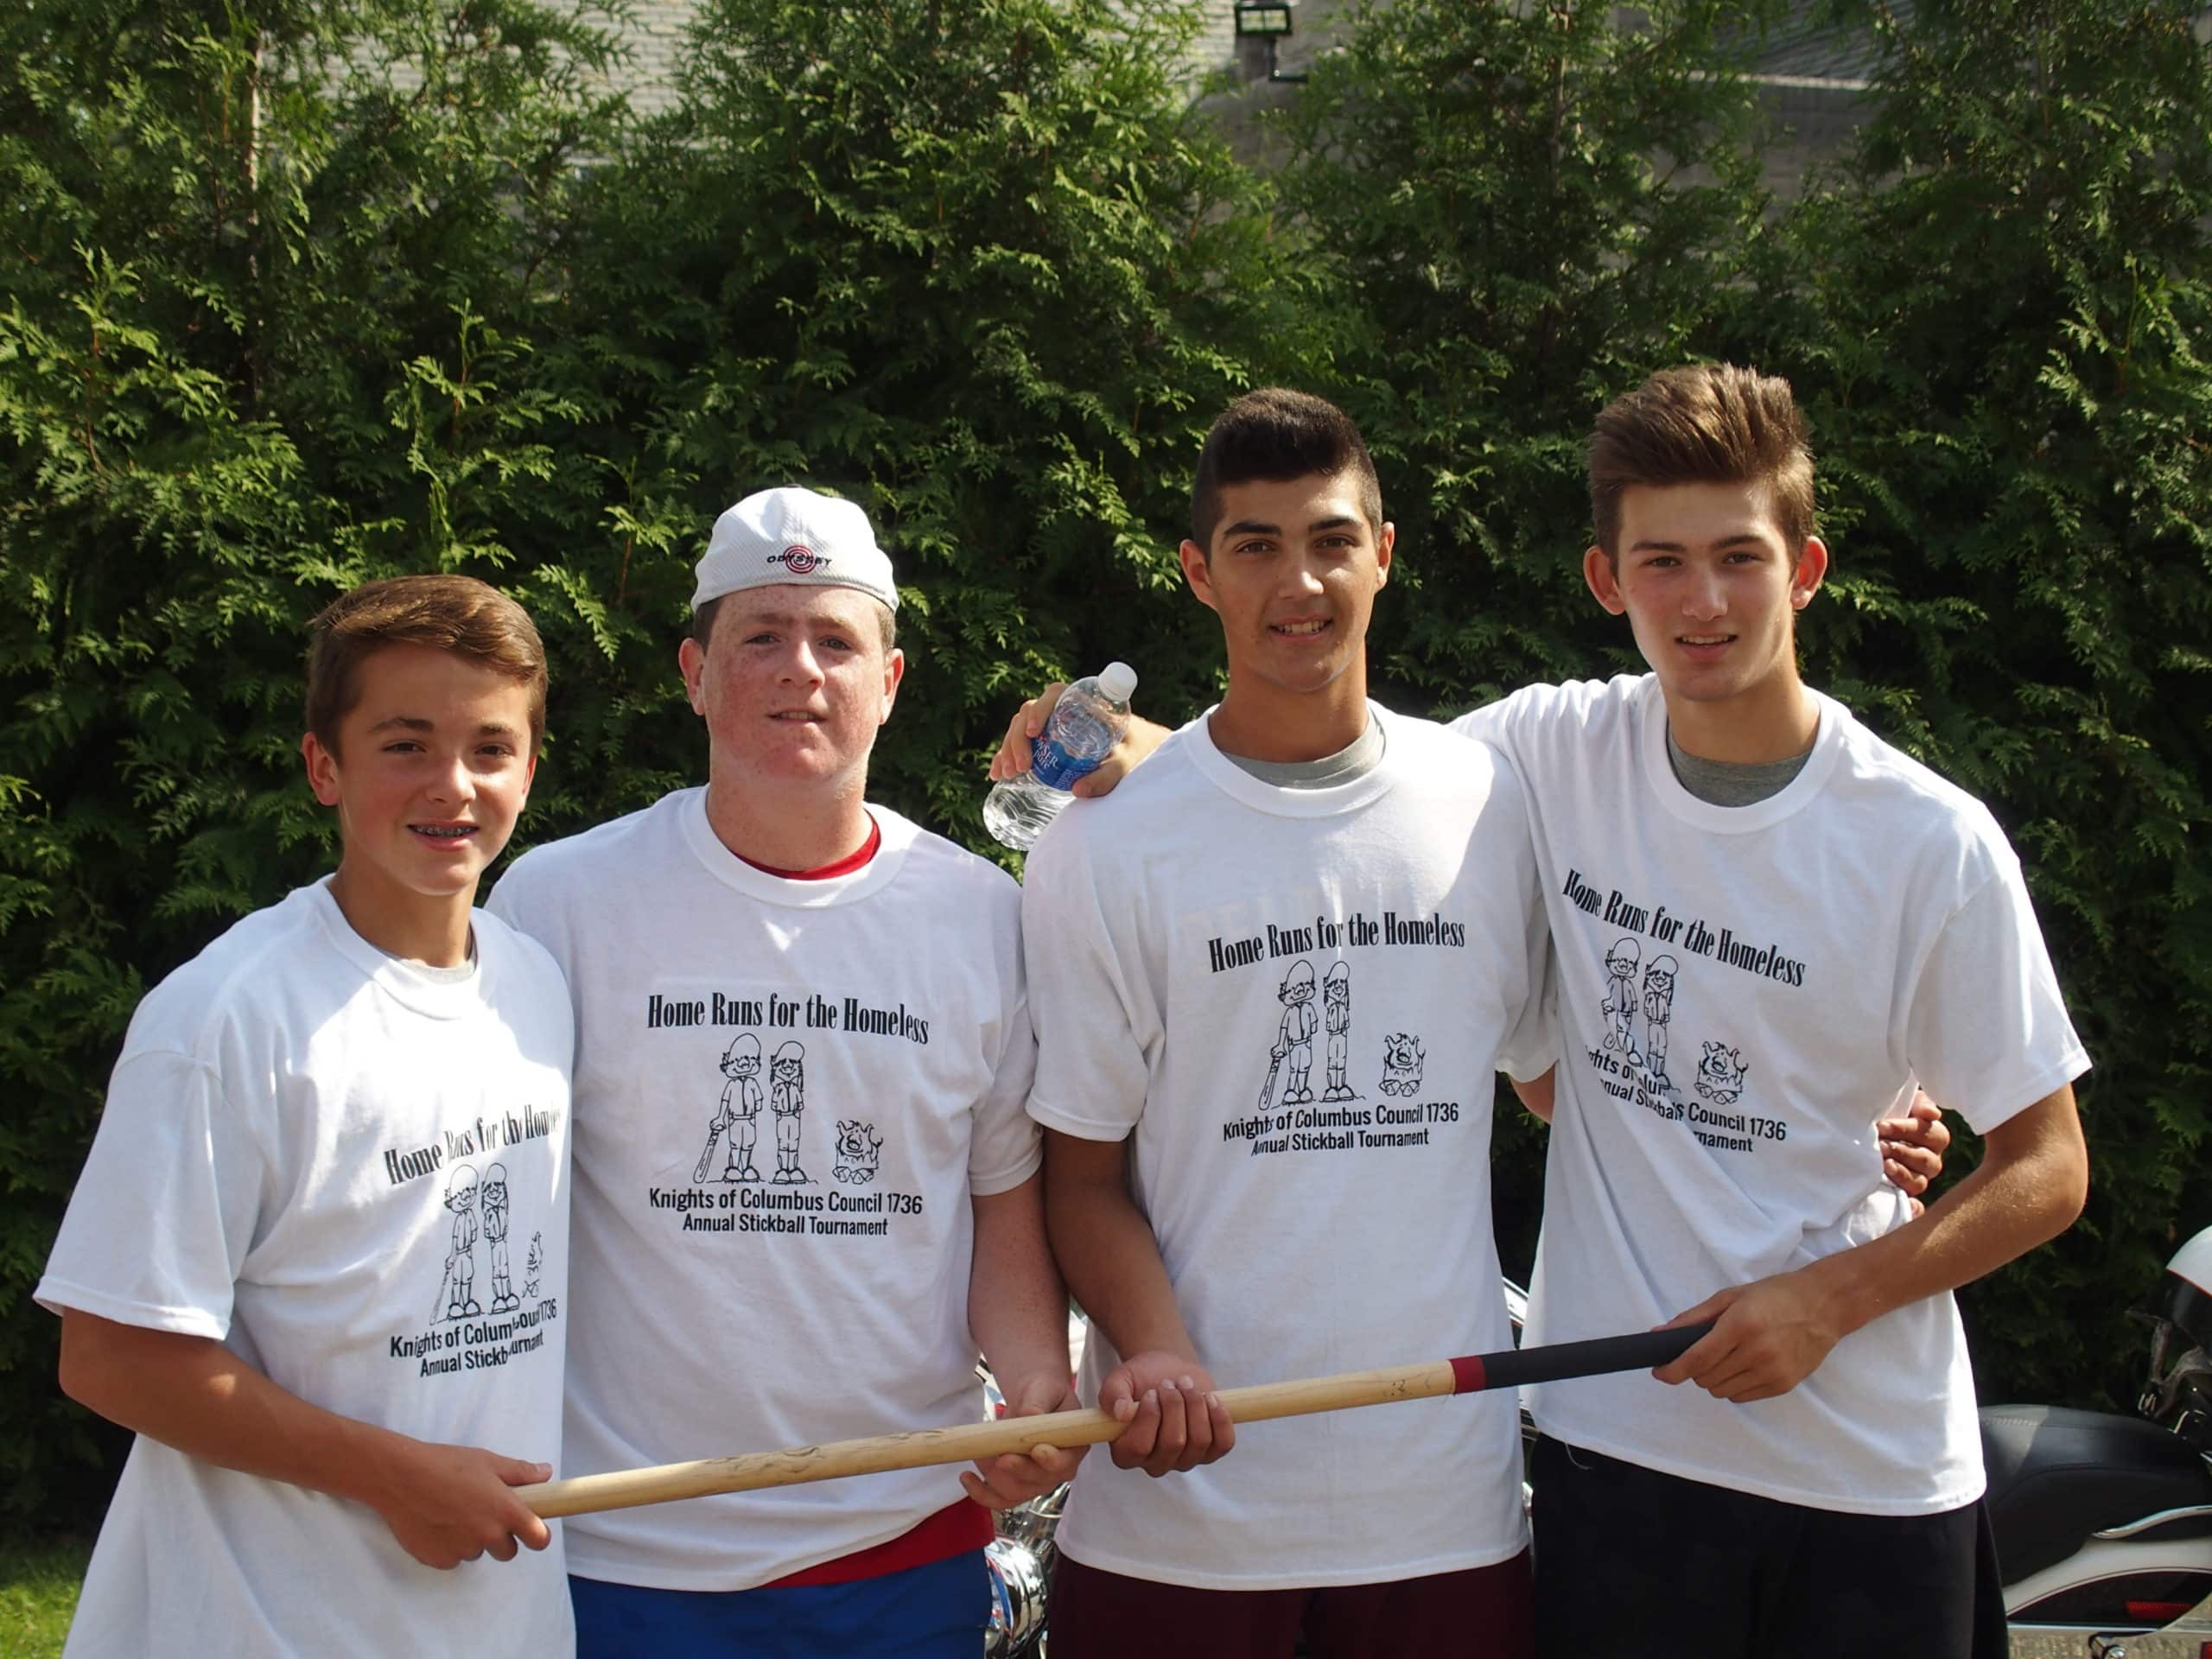 The Ridgewood Knights of Columbus Council #1736 held their annual stickball tournament